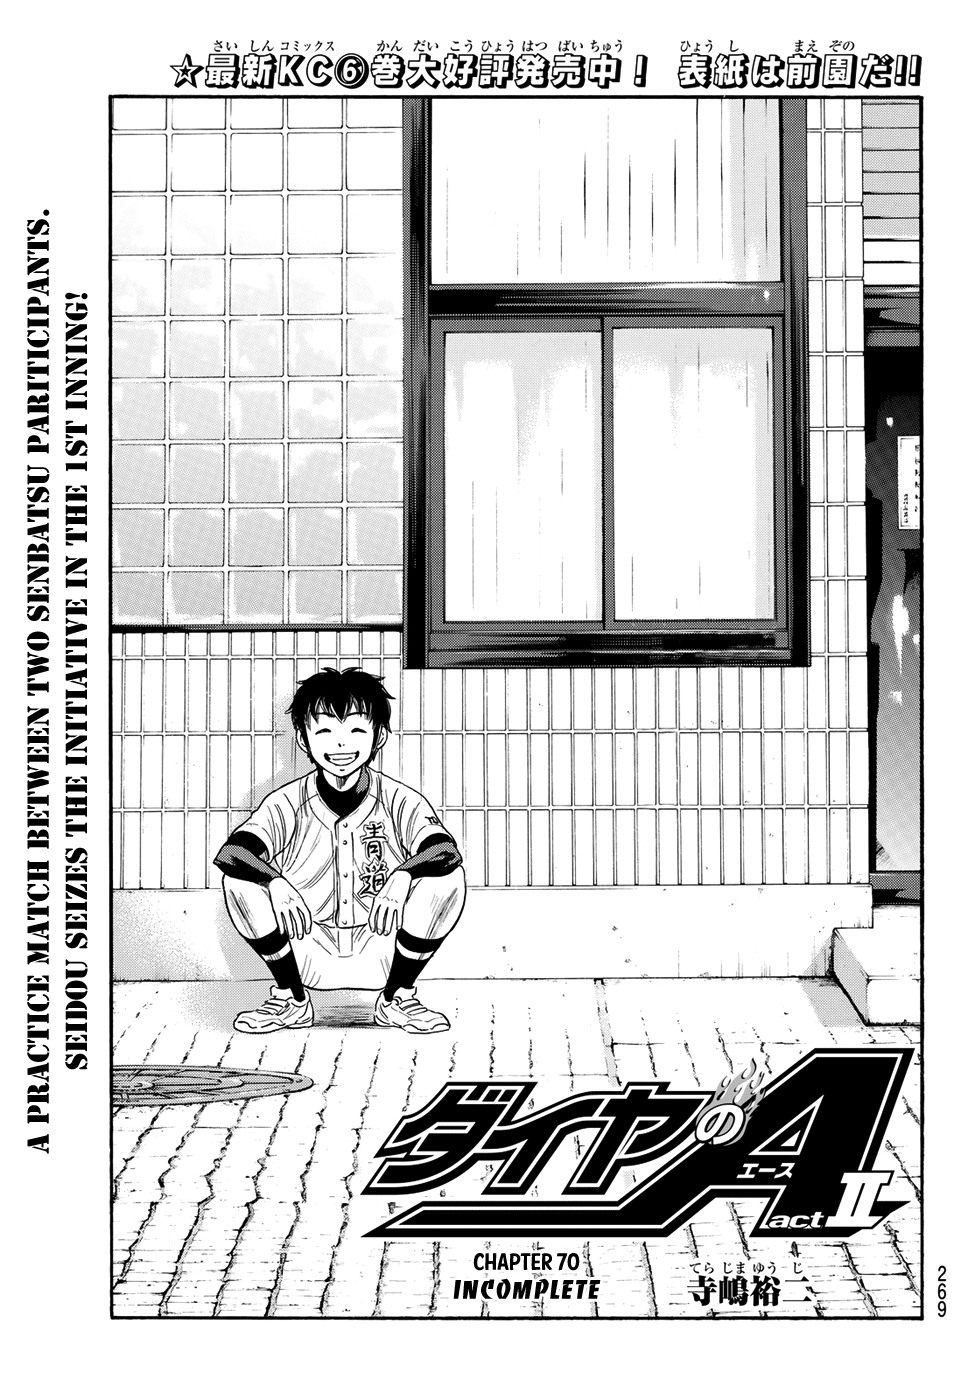 Diamond no Ace Act II Vol. 8 Ch. 70 Incomplete